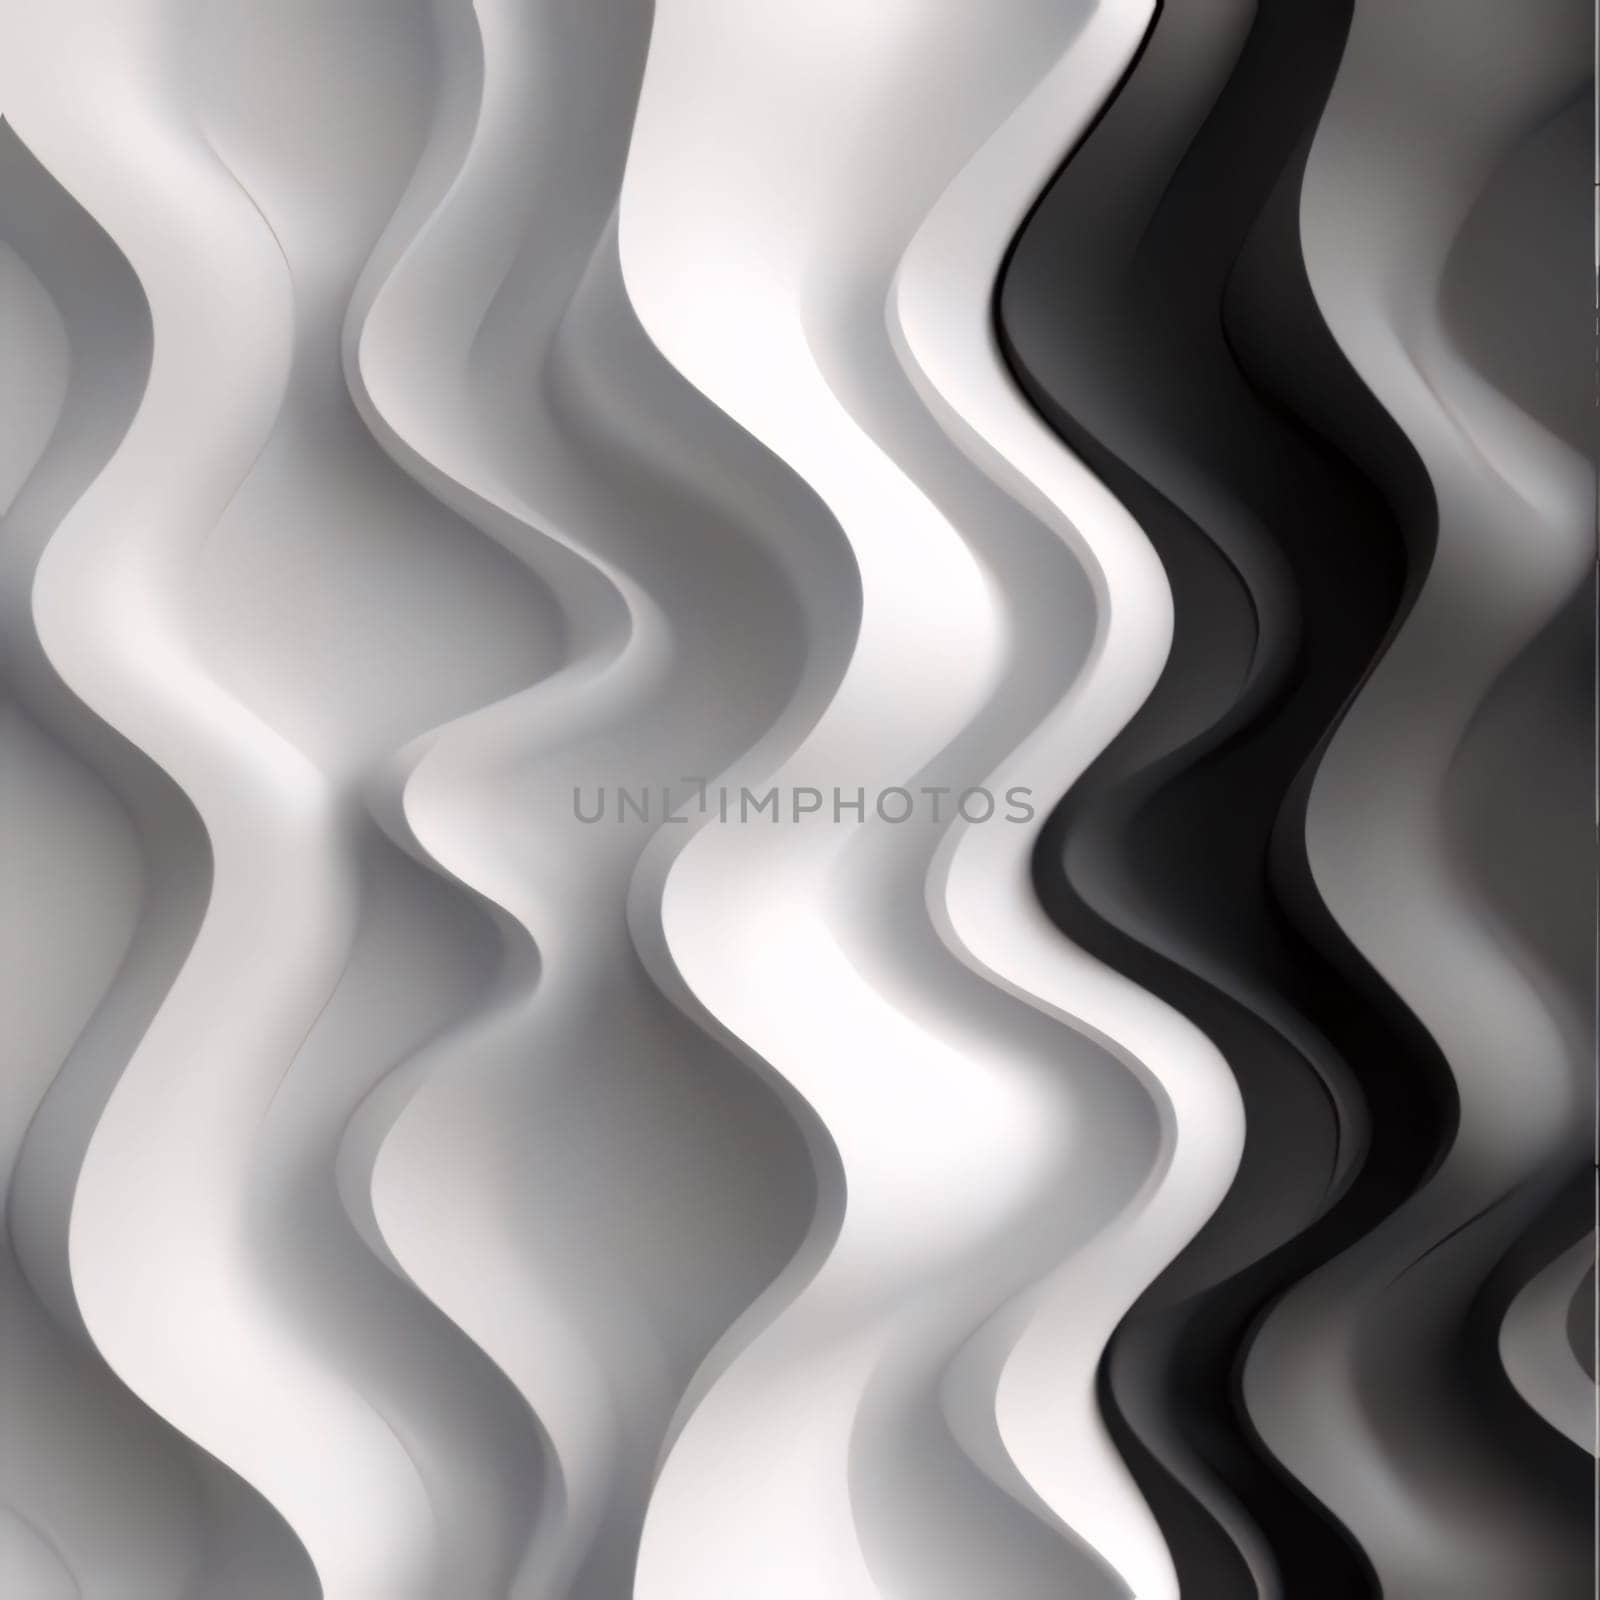 Abstract background design: Abstract wavy background. Vector illustration. Gray and black colors.